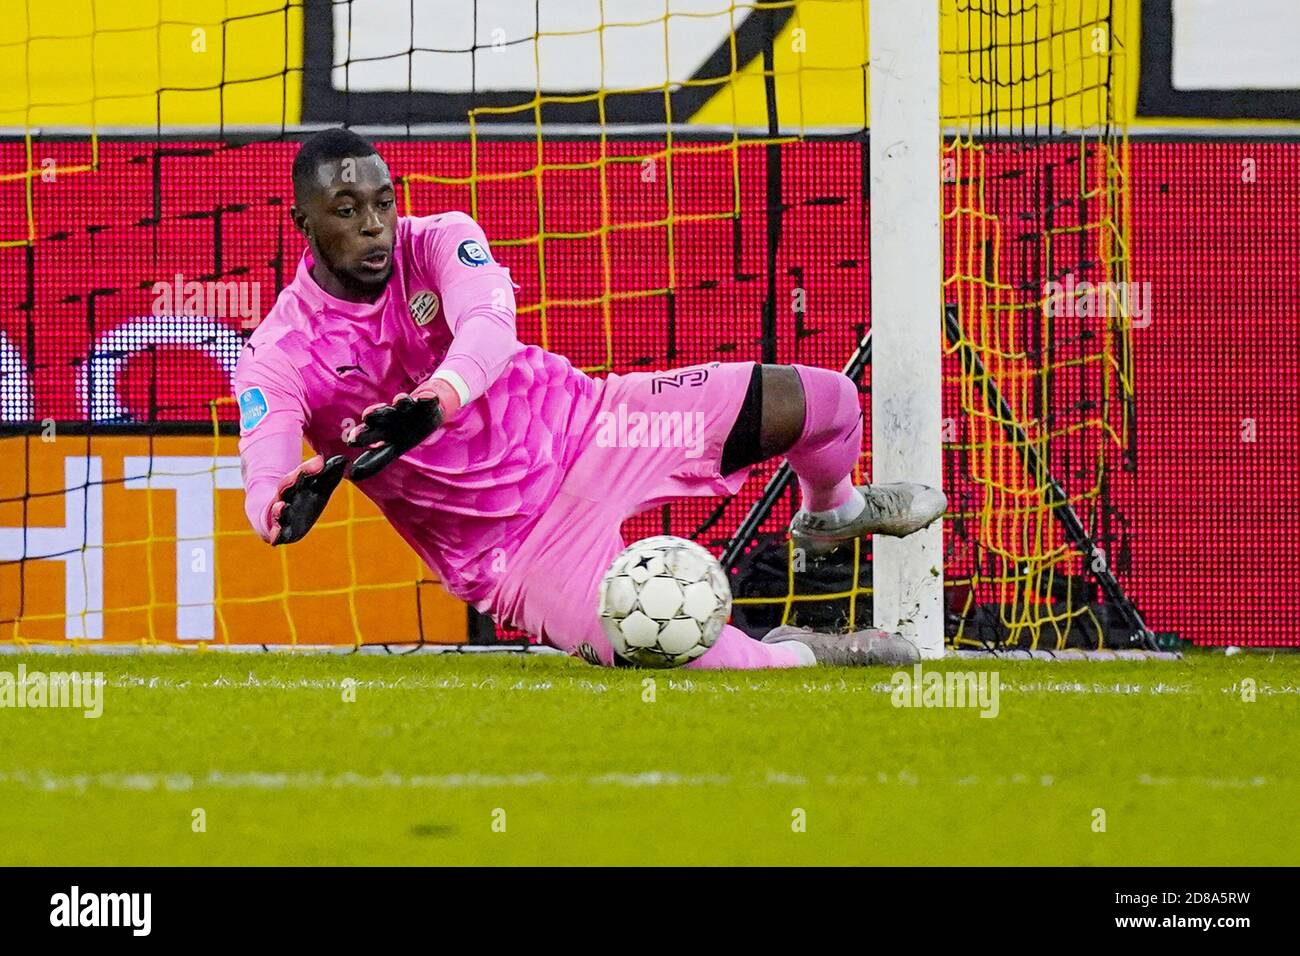 Yvon Mvogo of PSV during the Netherlands championship Eredivisie football match between Vitesse and PSV on October 25, 2020 at Gelredome Stadium in  C Stock Photo